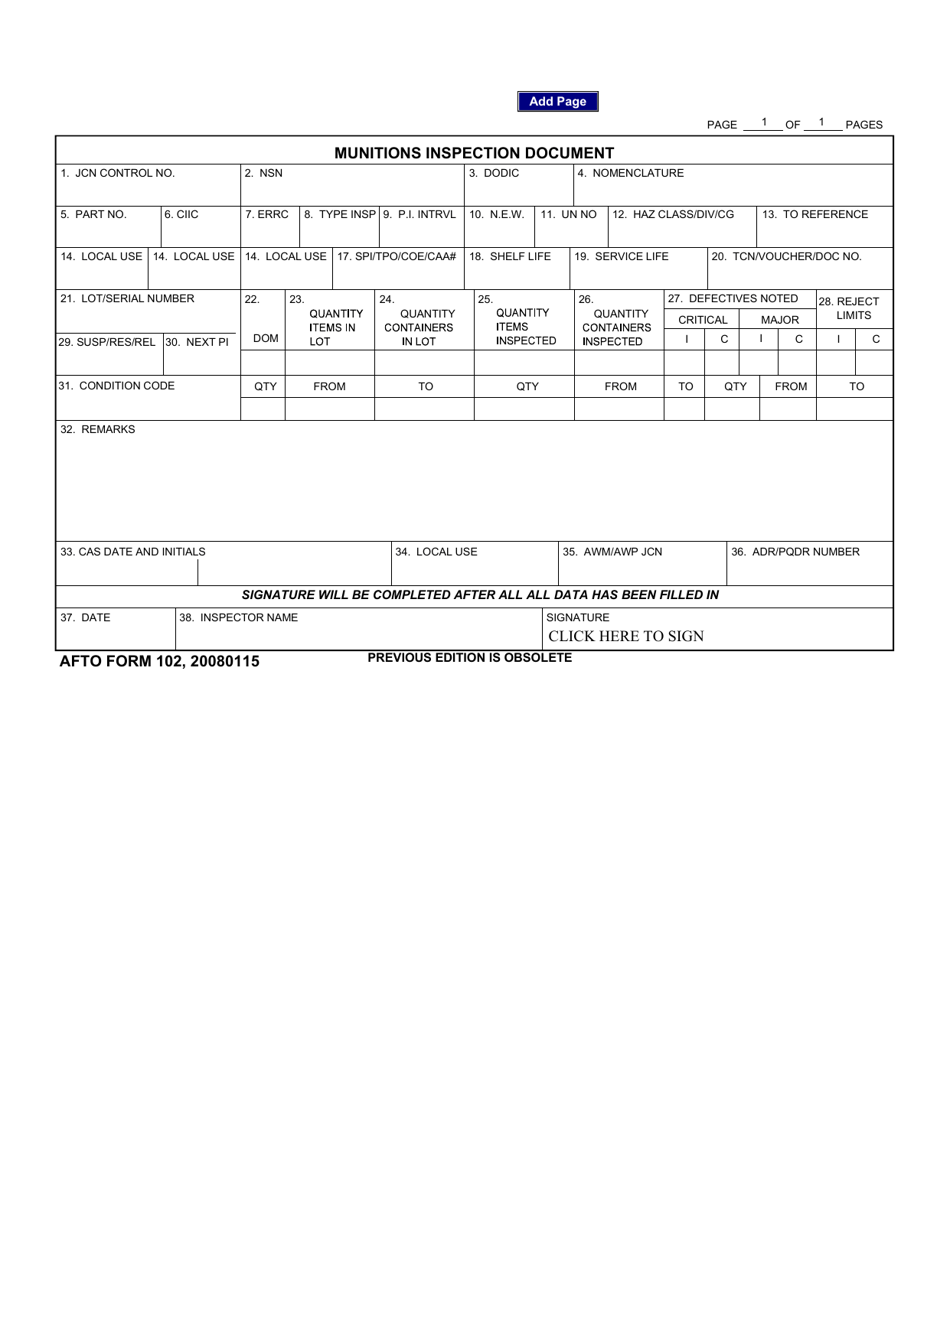 AFTO Form 102 Munitions Inspection Document, Page 1